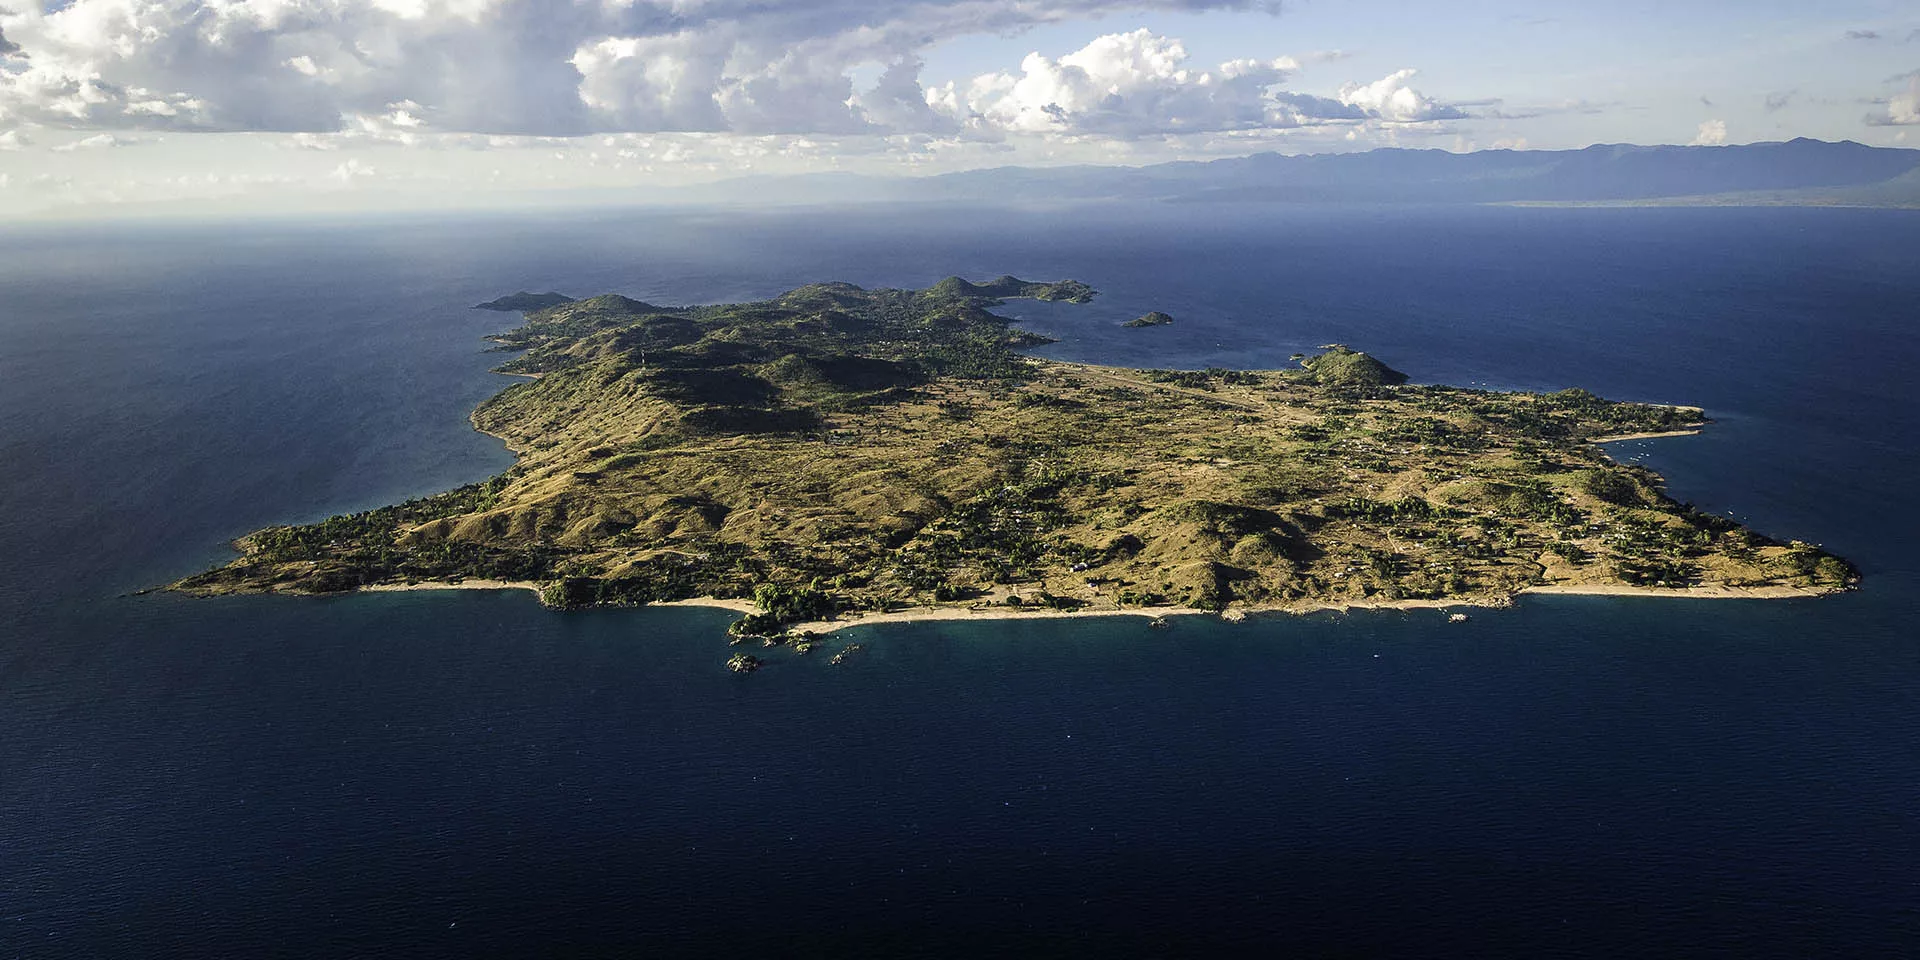 Likoma Island in Malawi, Africa | Diving,Swimming - Rated 0.8